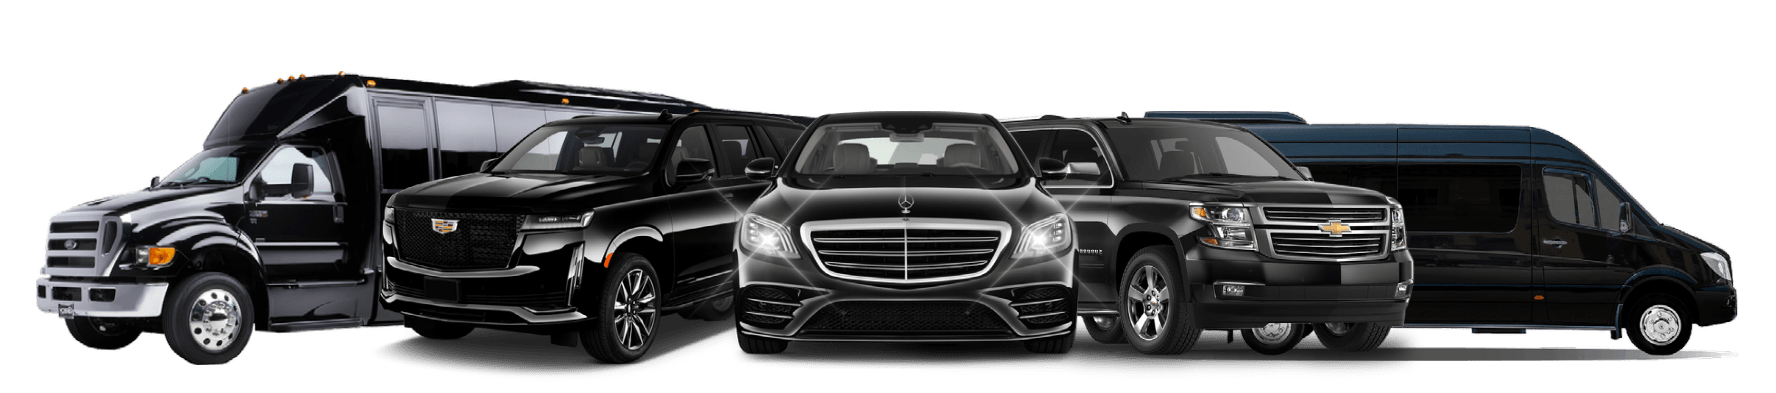 rental car service collection for Boston airports